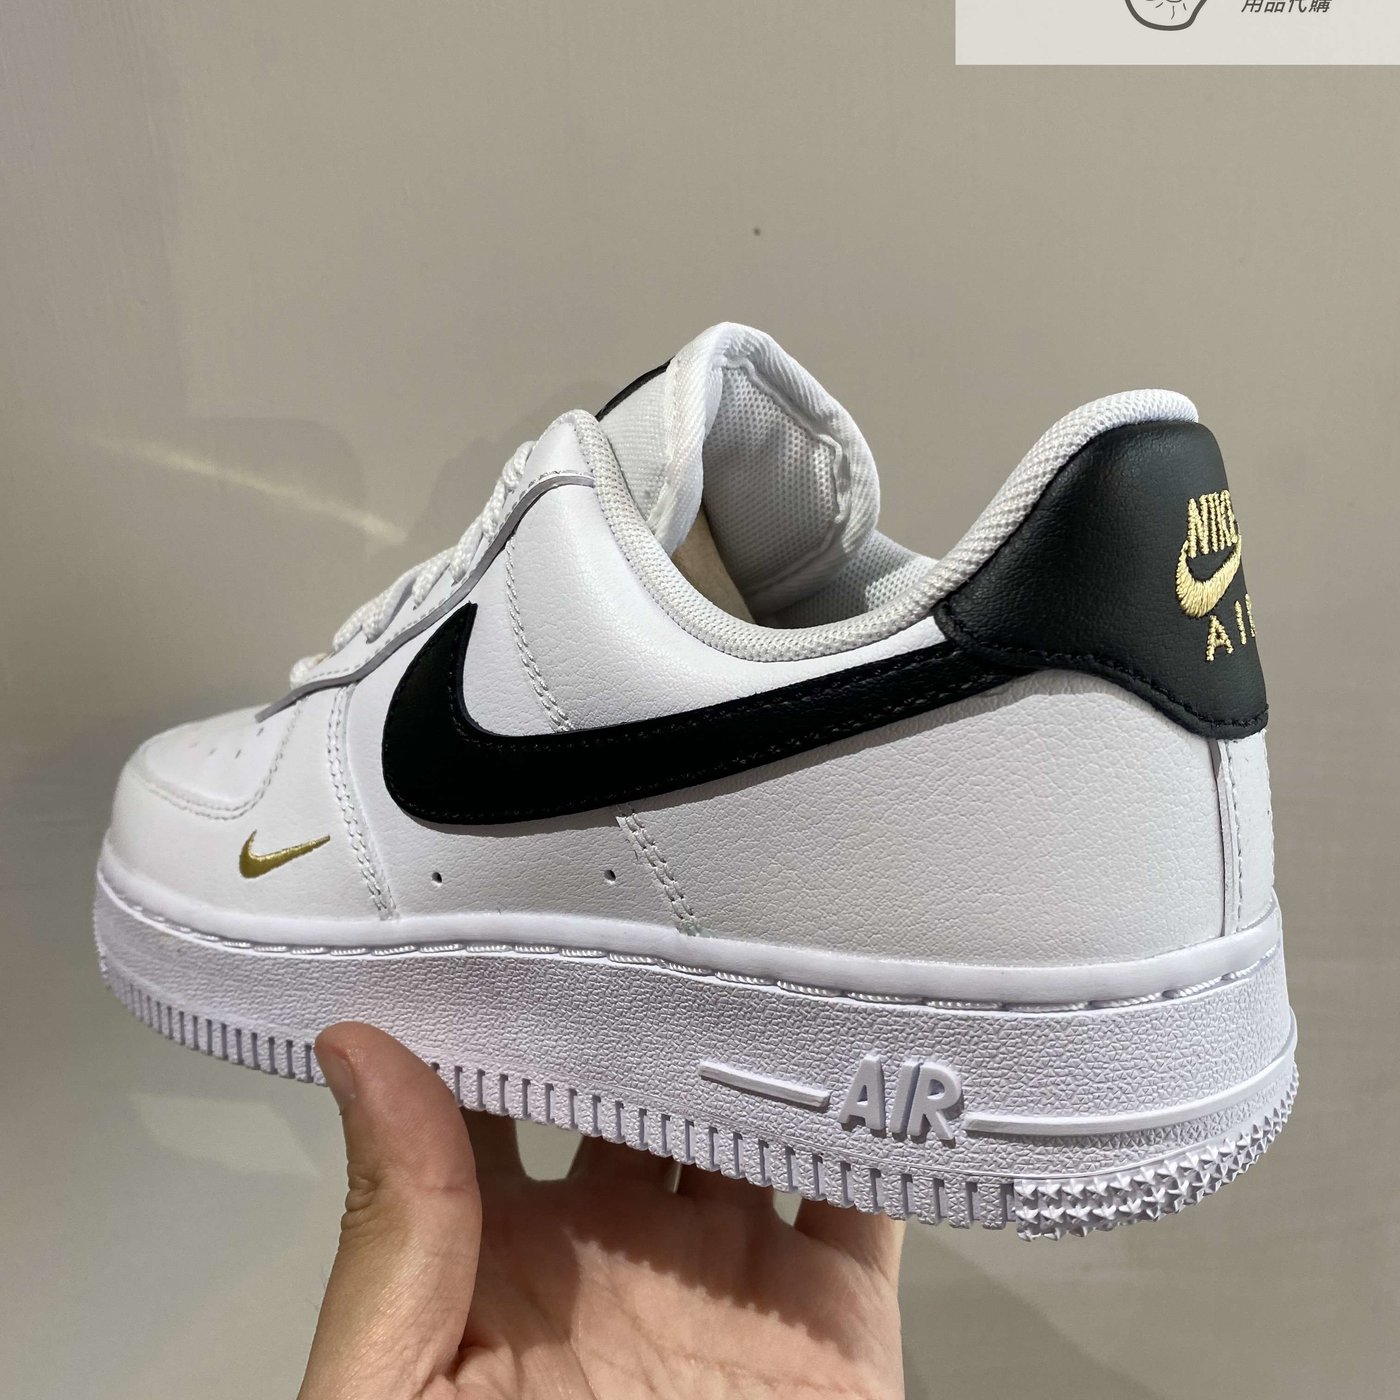 AND.】NIKE AIR FORCE 1 07 ESSENTIAL 小金勾白底黑勾女款CZ0270-102